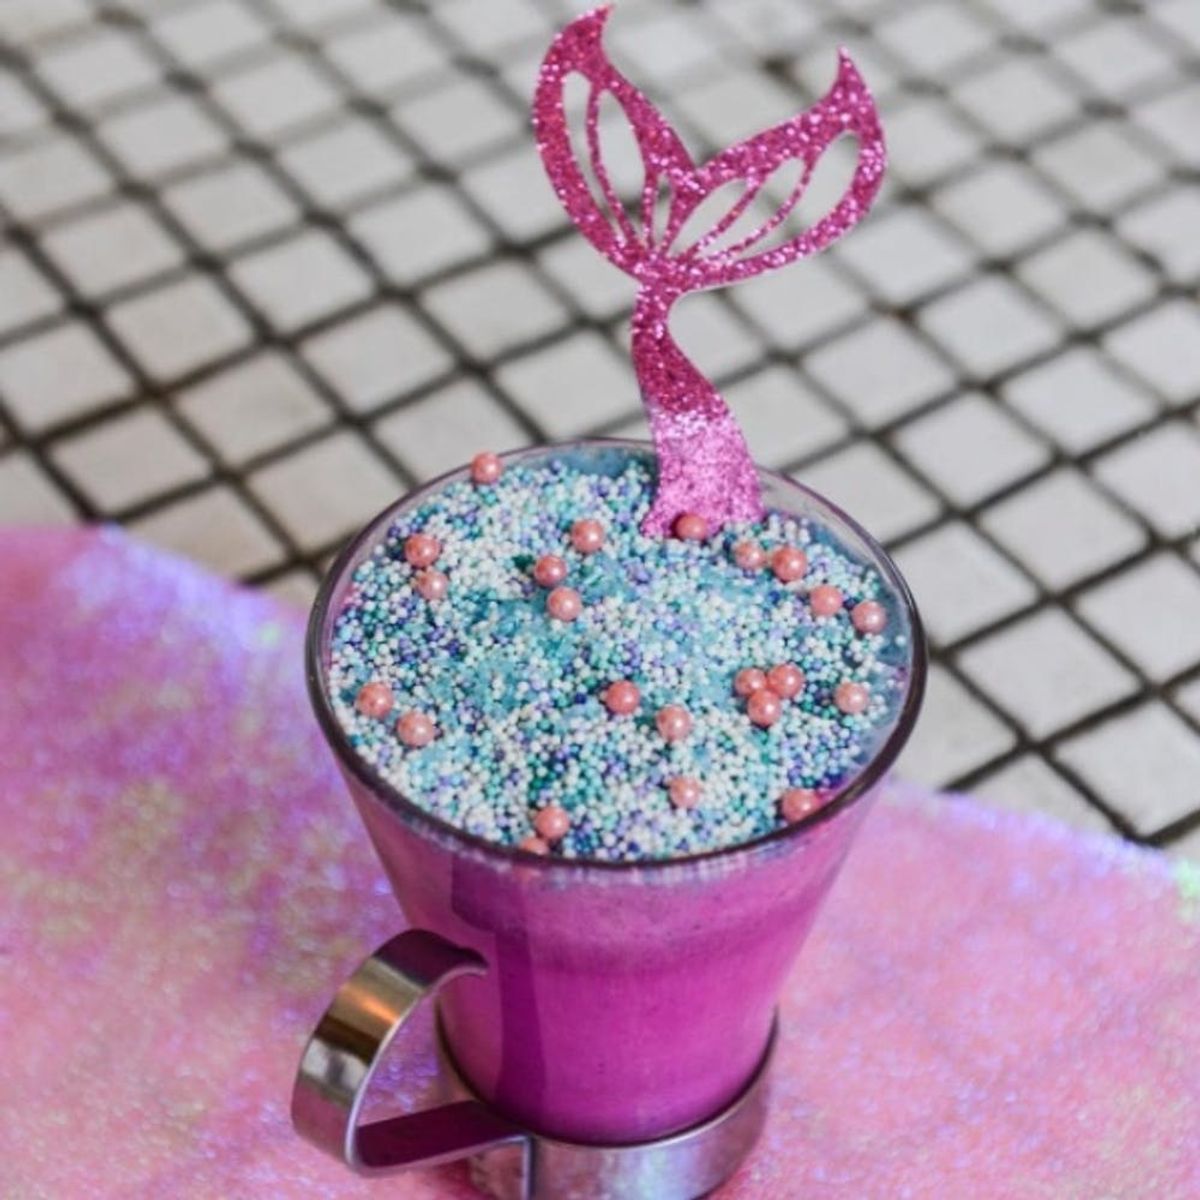 Merbabe Lattes Are Here to Replace the Unicorn Latte As the Next Big Instagram Trend